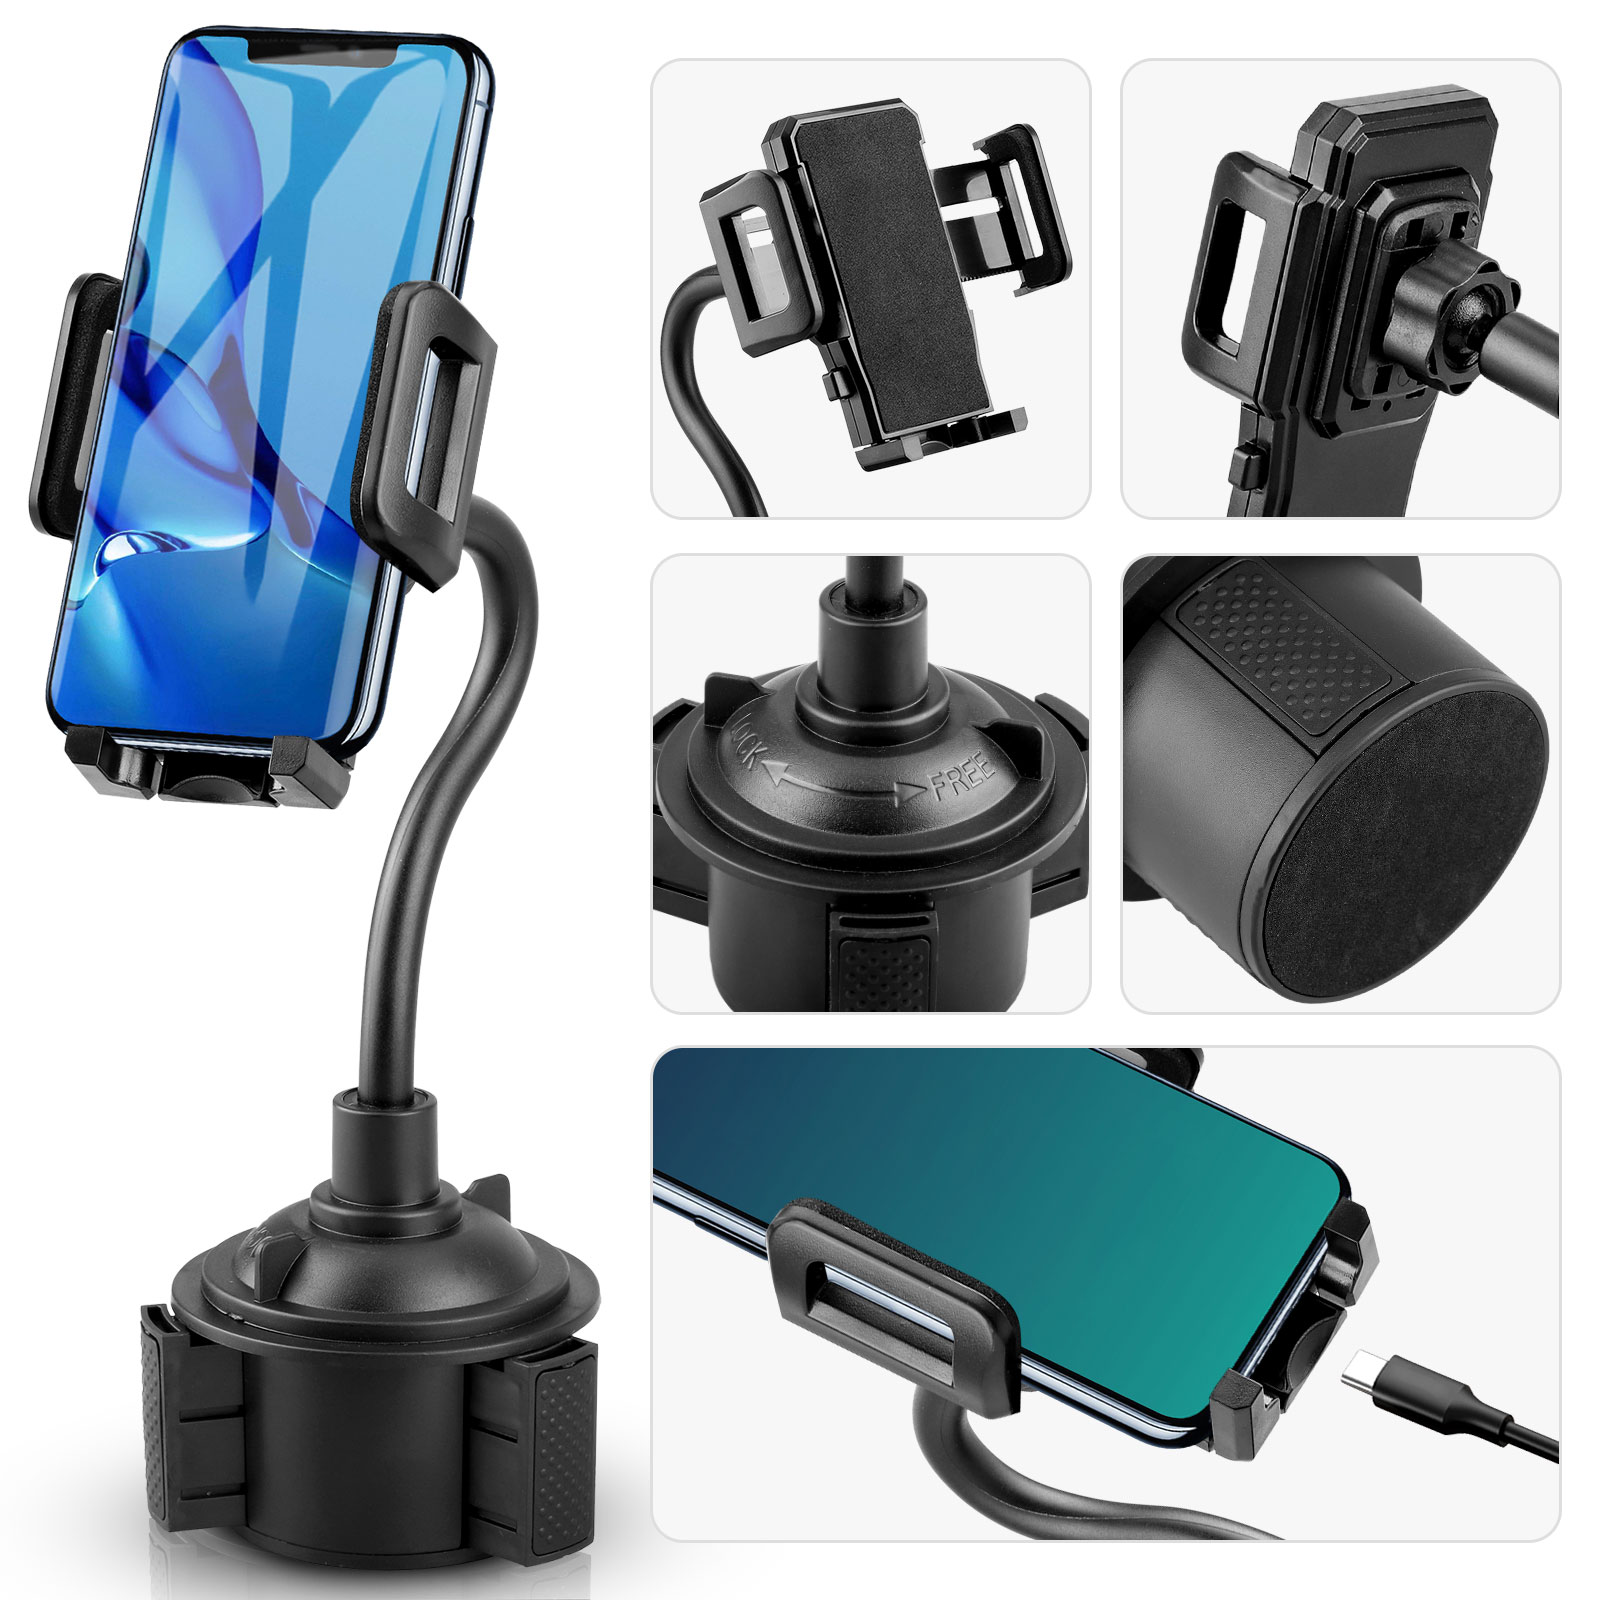 Car Phone Mount, EEEkit Universal Cell Phone Holder, Car Cup Holder Mount Fit for iPhone 13 12 Pro Max 11 Xs Max R X 8 Plus, Samsung Galaxy S21 S20 S10 and More - image 2 of 11